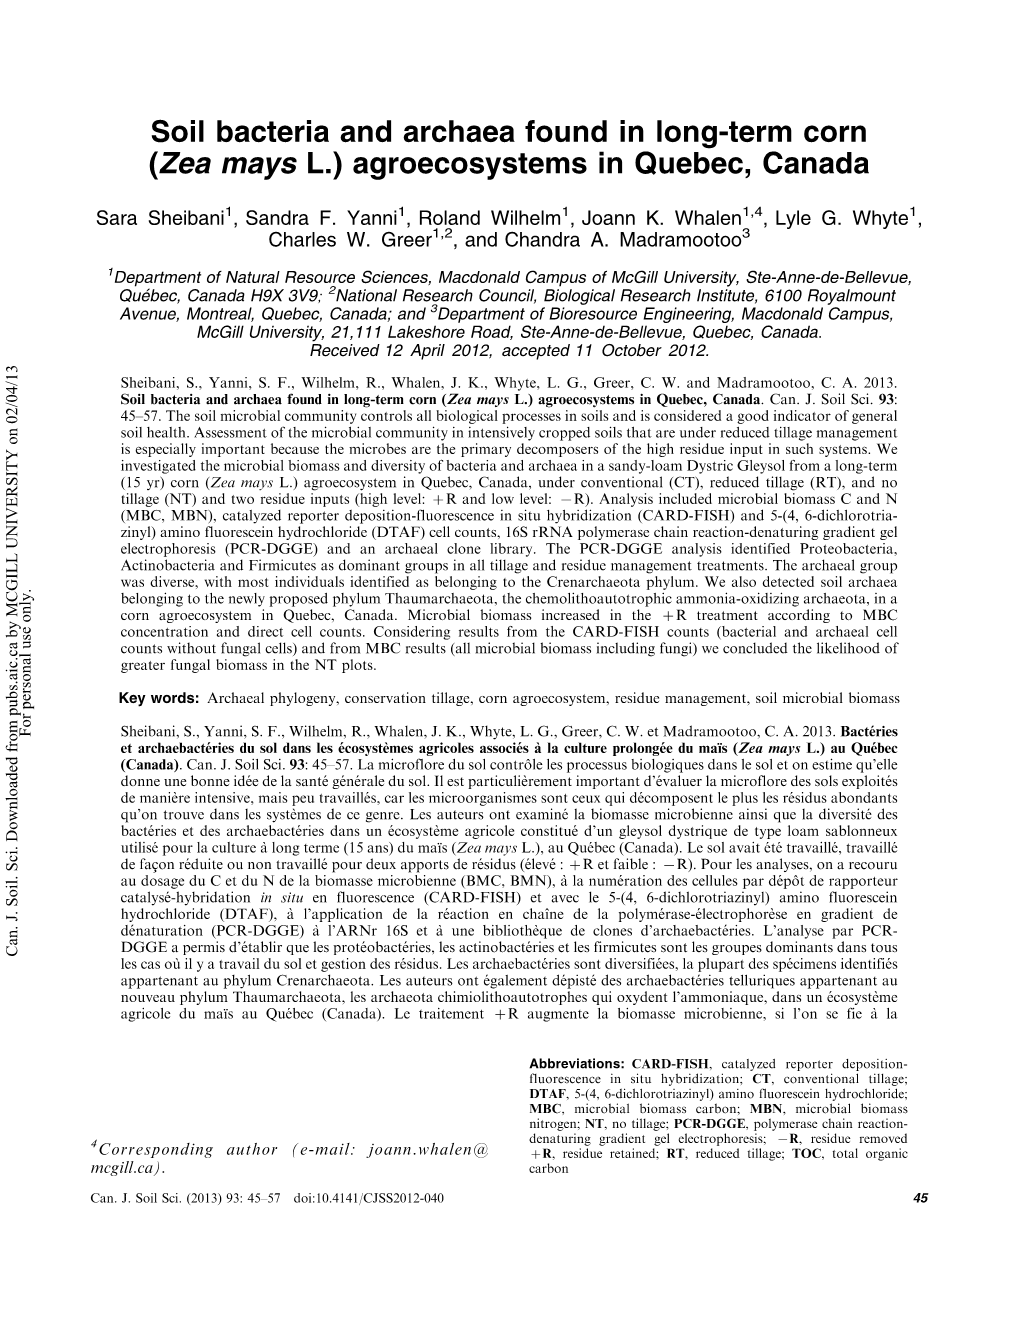 Soil Bacteria and Archaea Found in Long-Term Corn (Zea Mays L.) Agroecosystems in Quebec, Canada